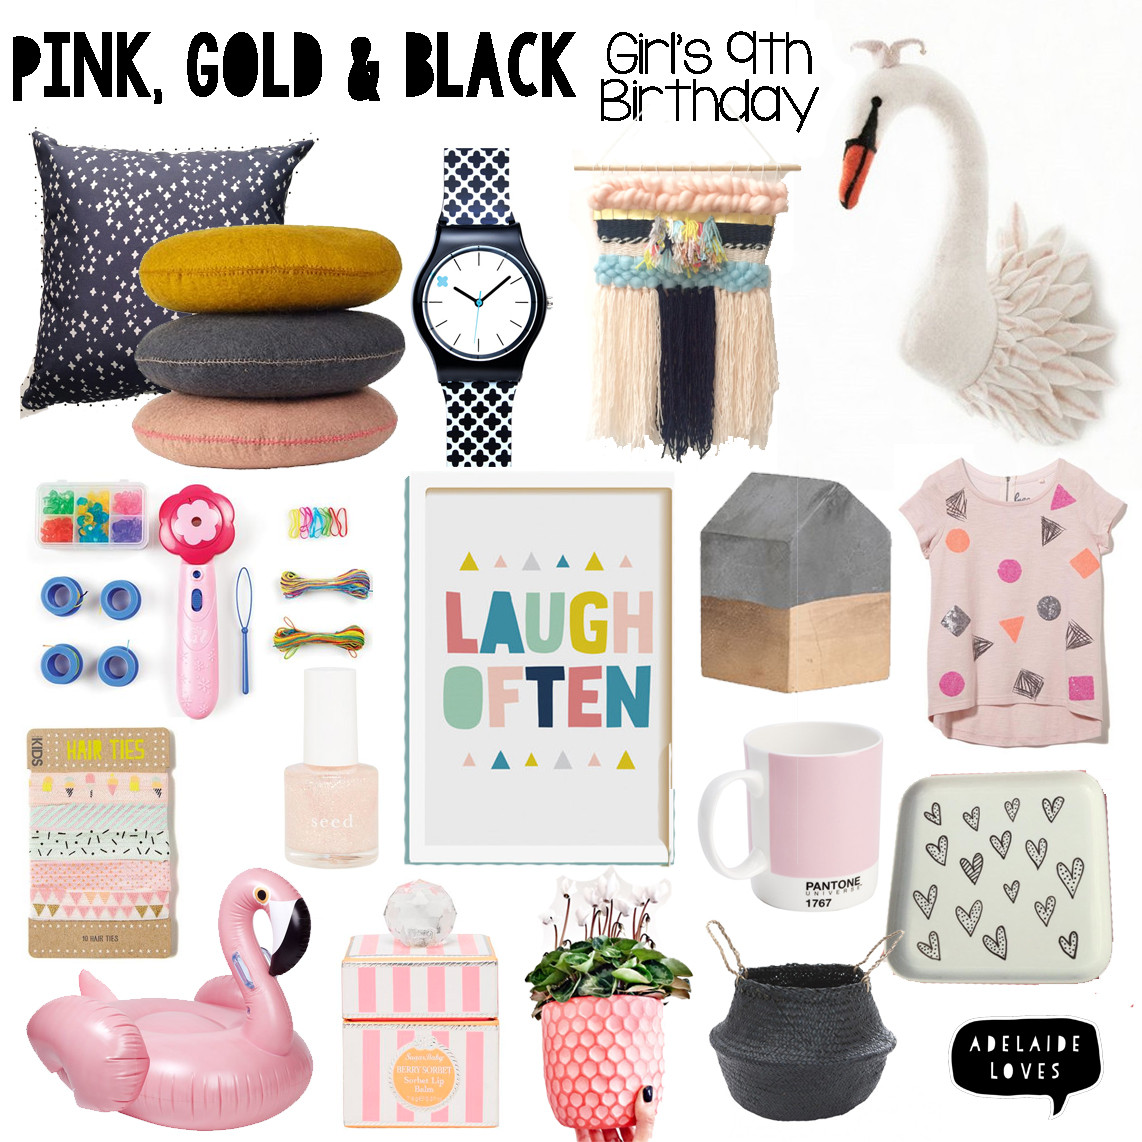 Birthday Gift Ideas For 9 Yr Old Girl
 Shop The Look Adelaide Loves